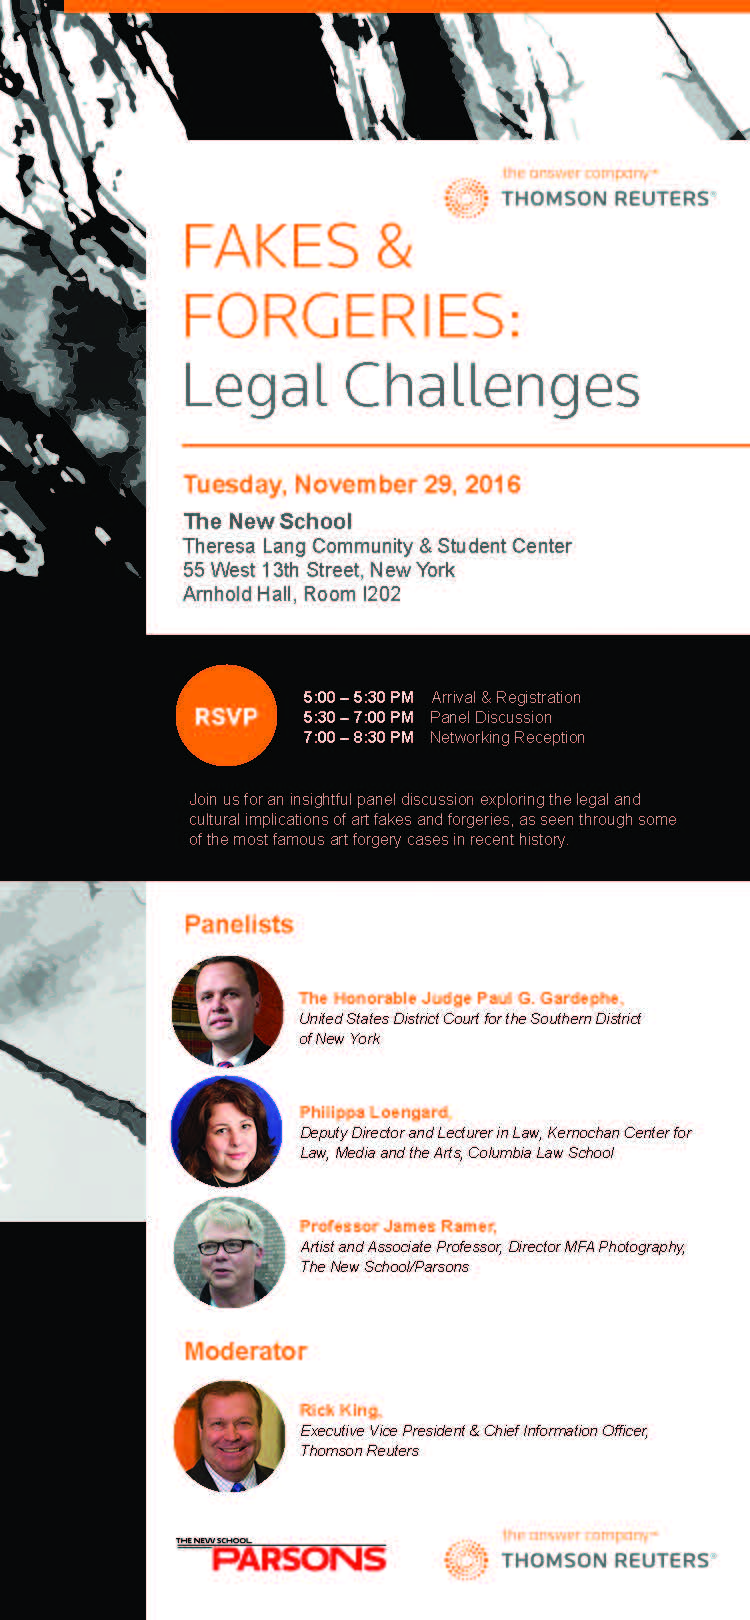 CANCELLED: Fakes and Forgeries: Legal Challenges Panel Discussion, 11/29